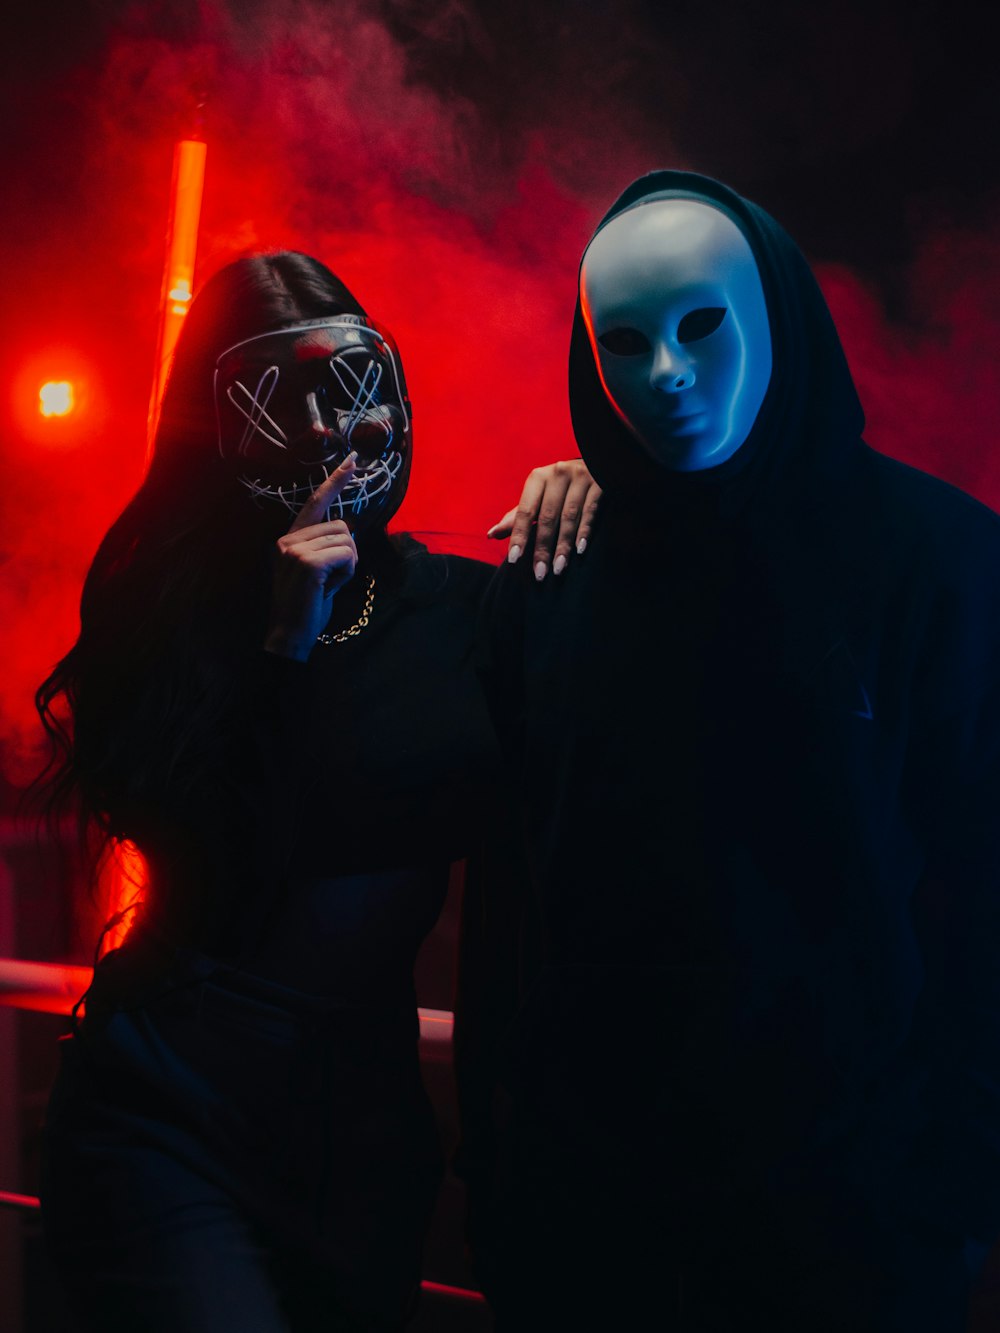 a man and a woman wearing masks standing in front of a red light